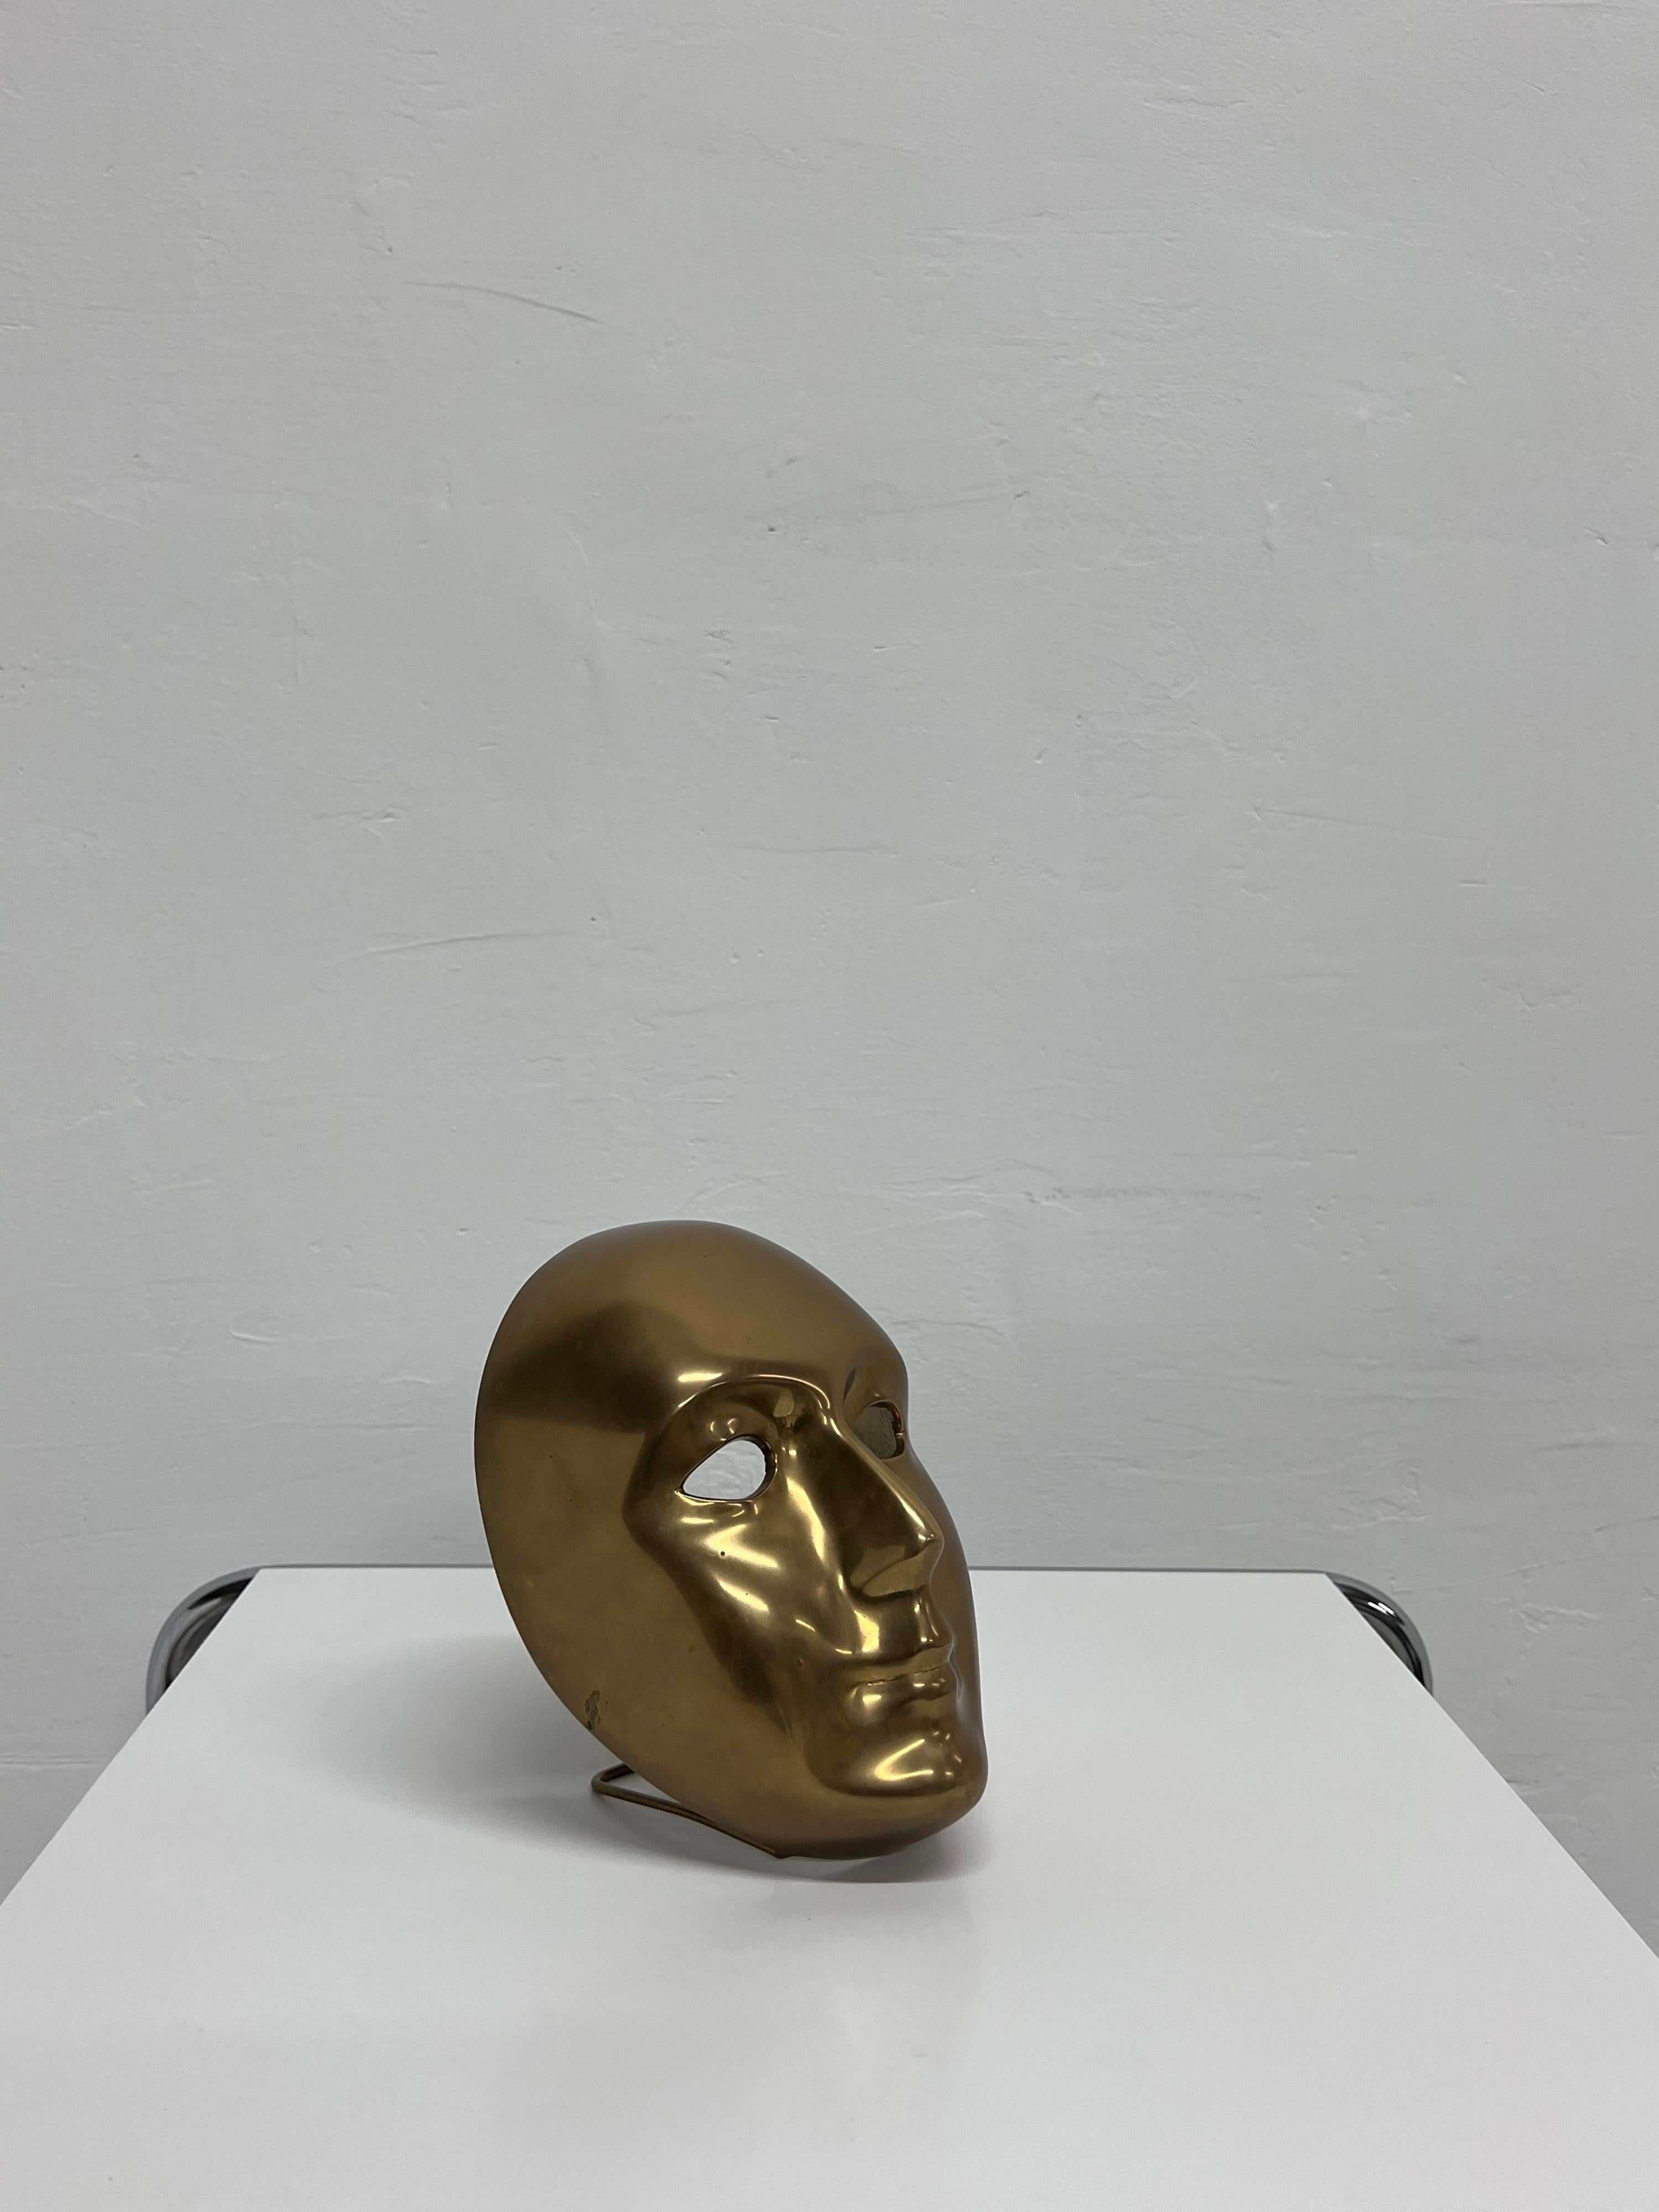 Polished Bronze Venetian Mask Sculpture by Volare, 1994 For Sale 6